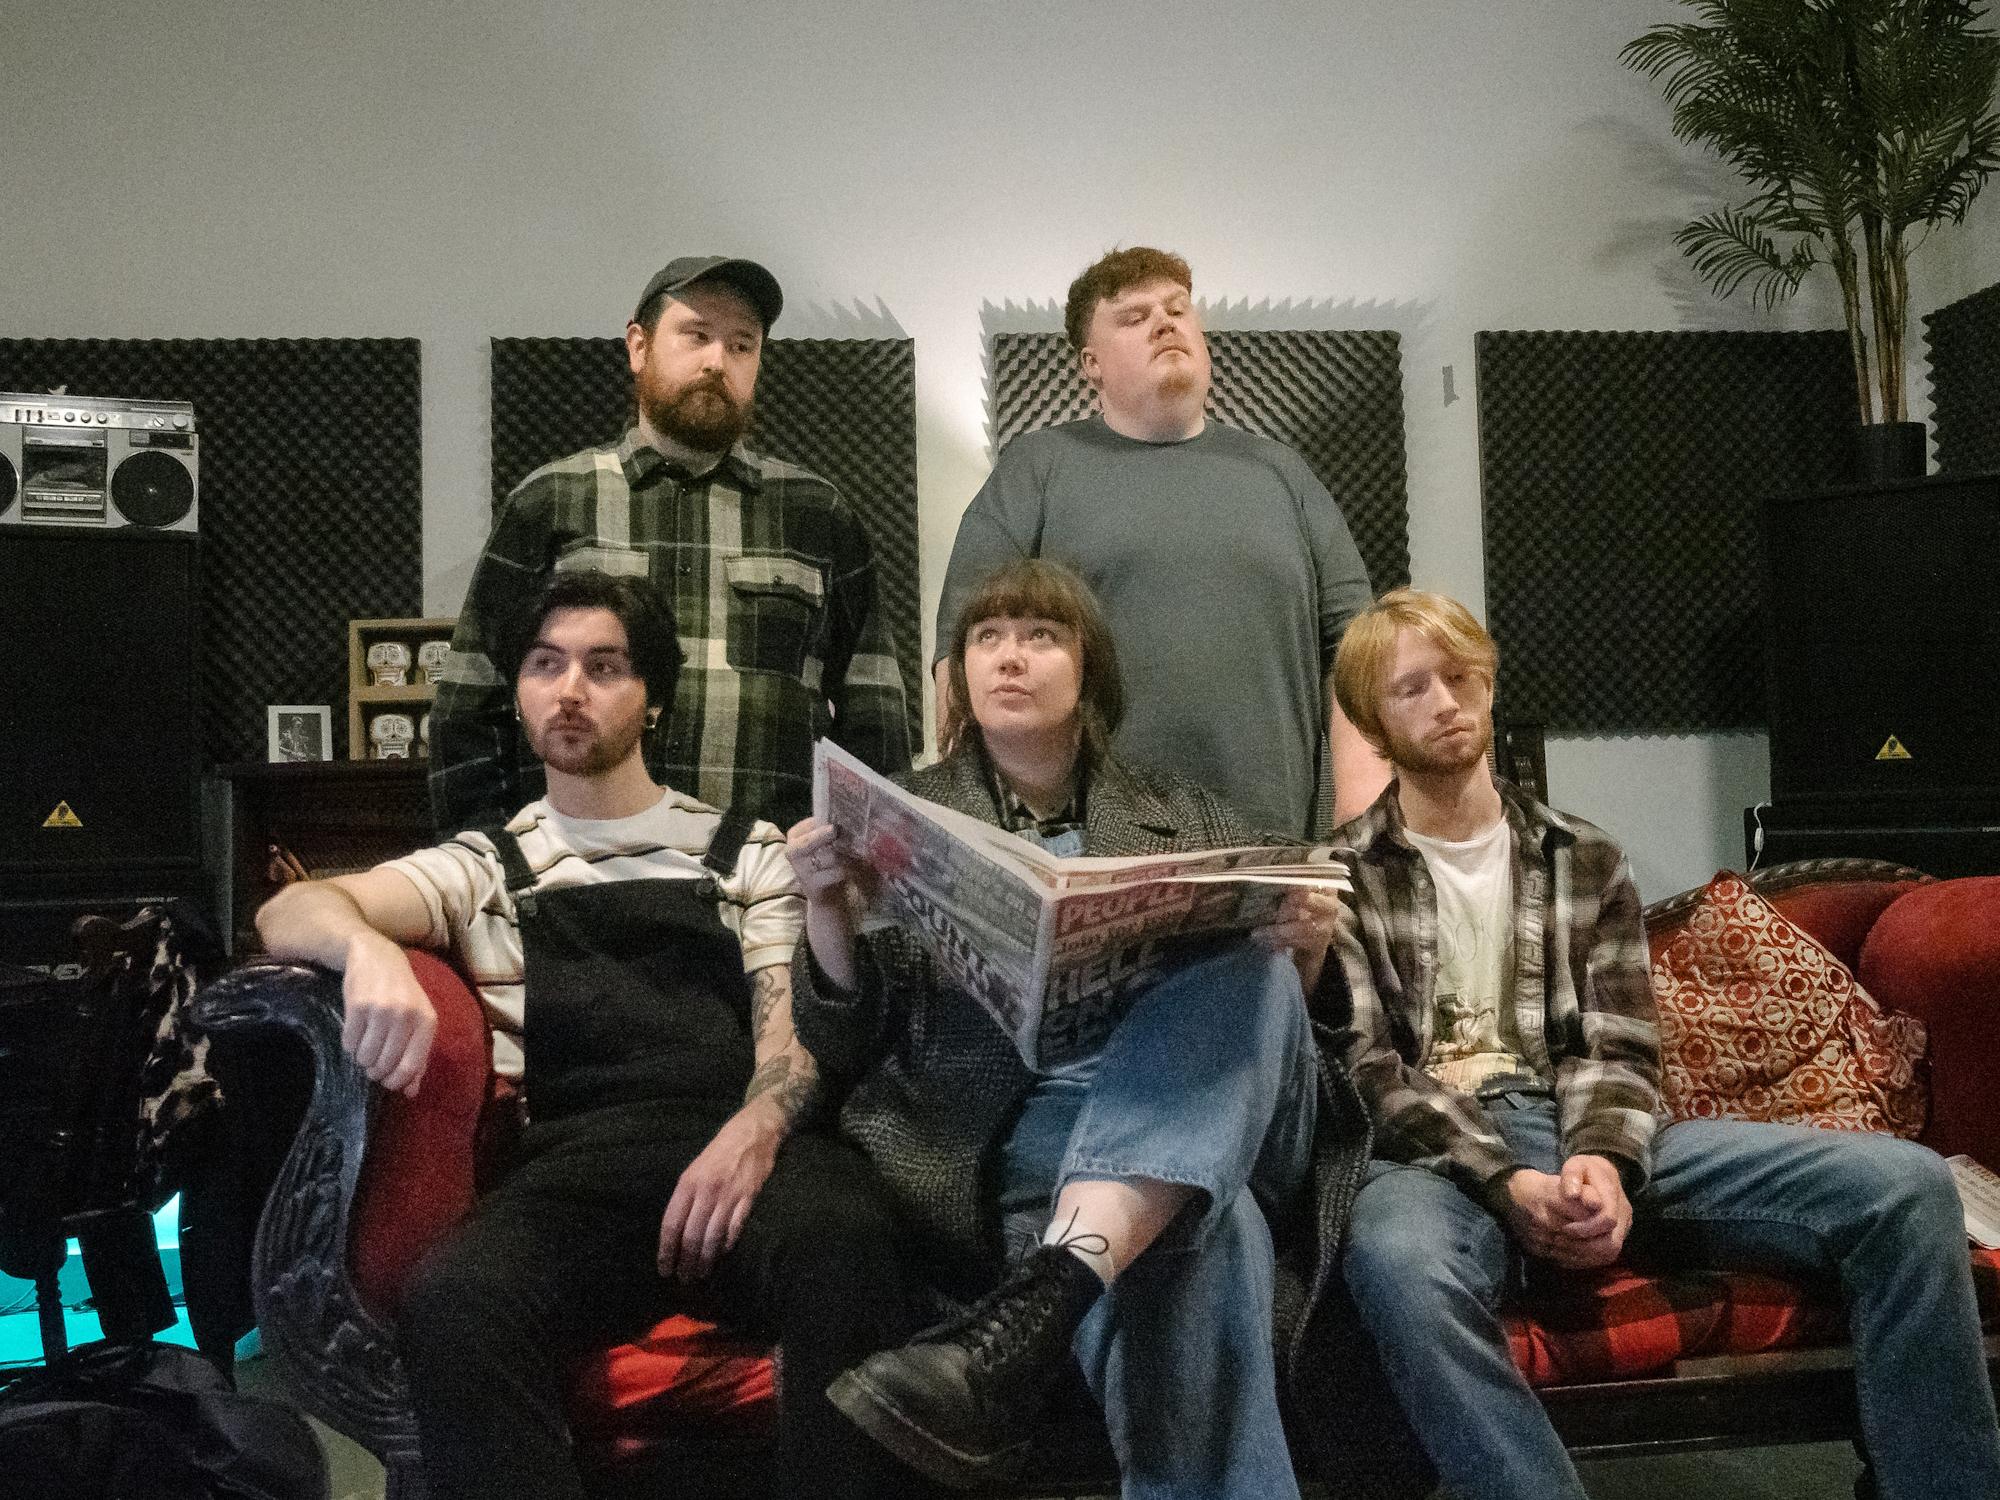 Ben Cronin From the Dublin Indie Pop Act Trinkets Discusses the Band’s Upcoming Double-Sided Single, “Playing It Shy”/”Juniper”